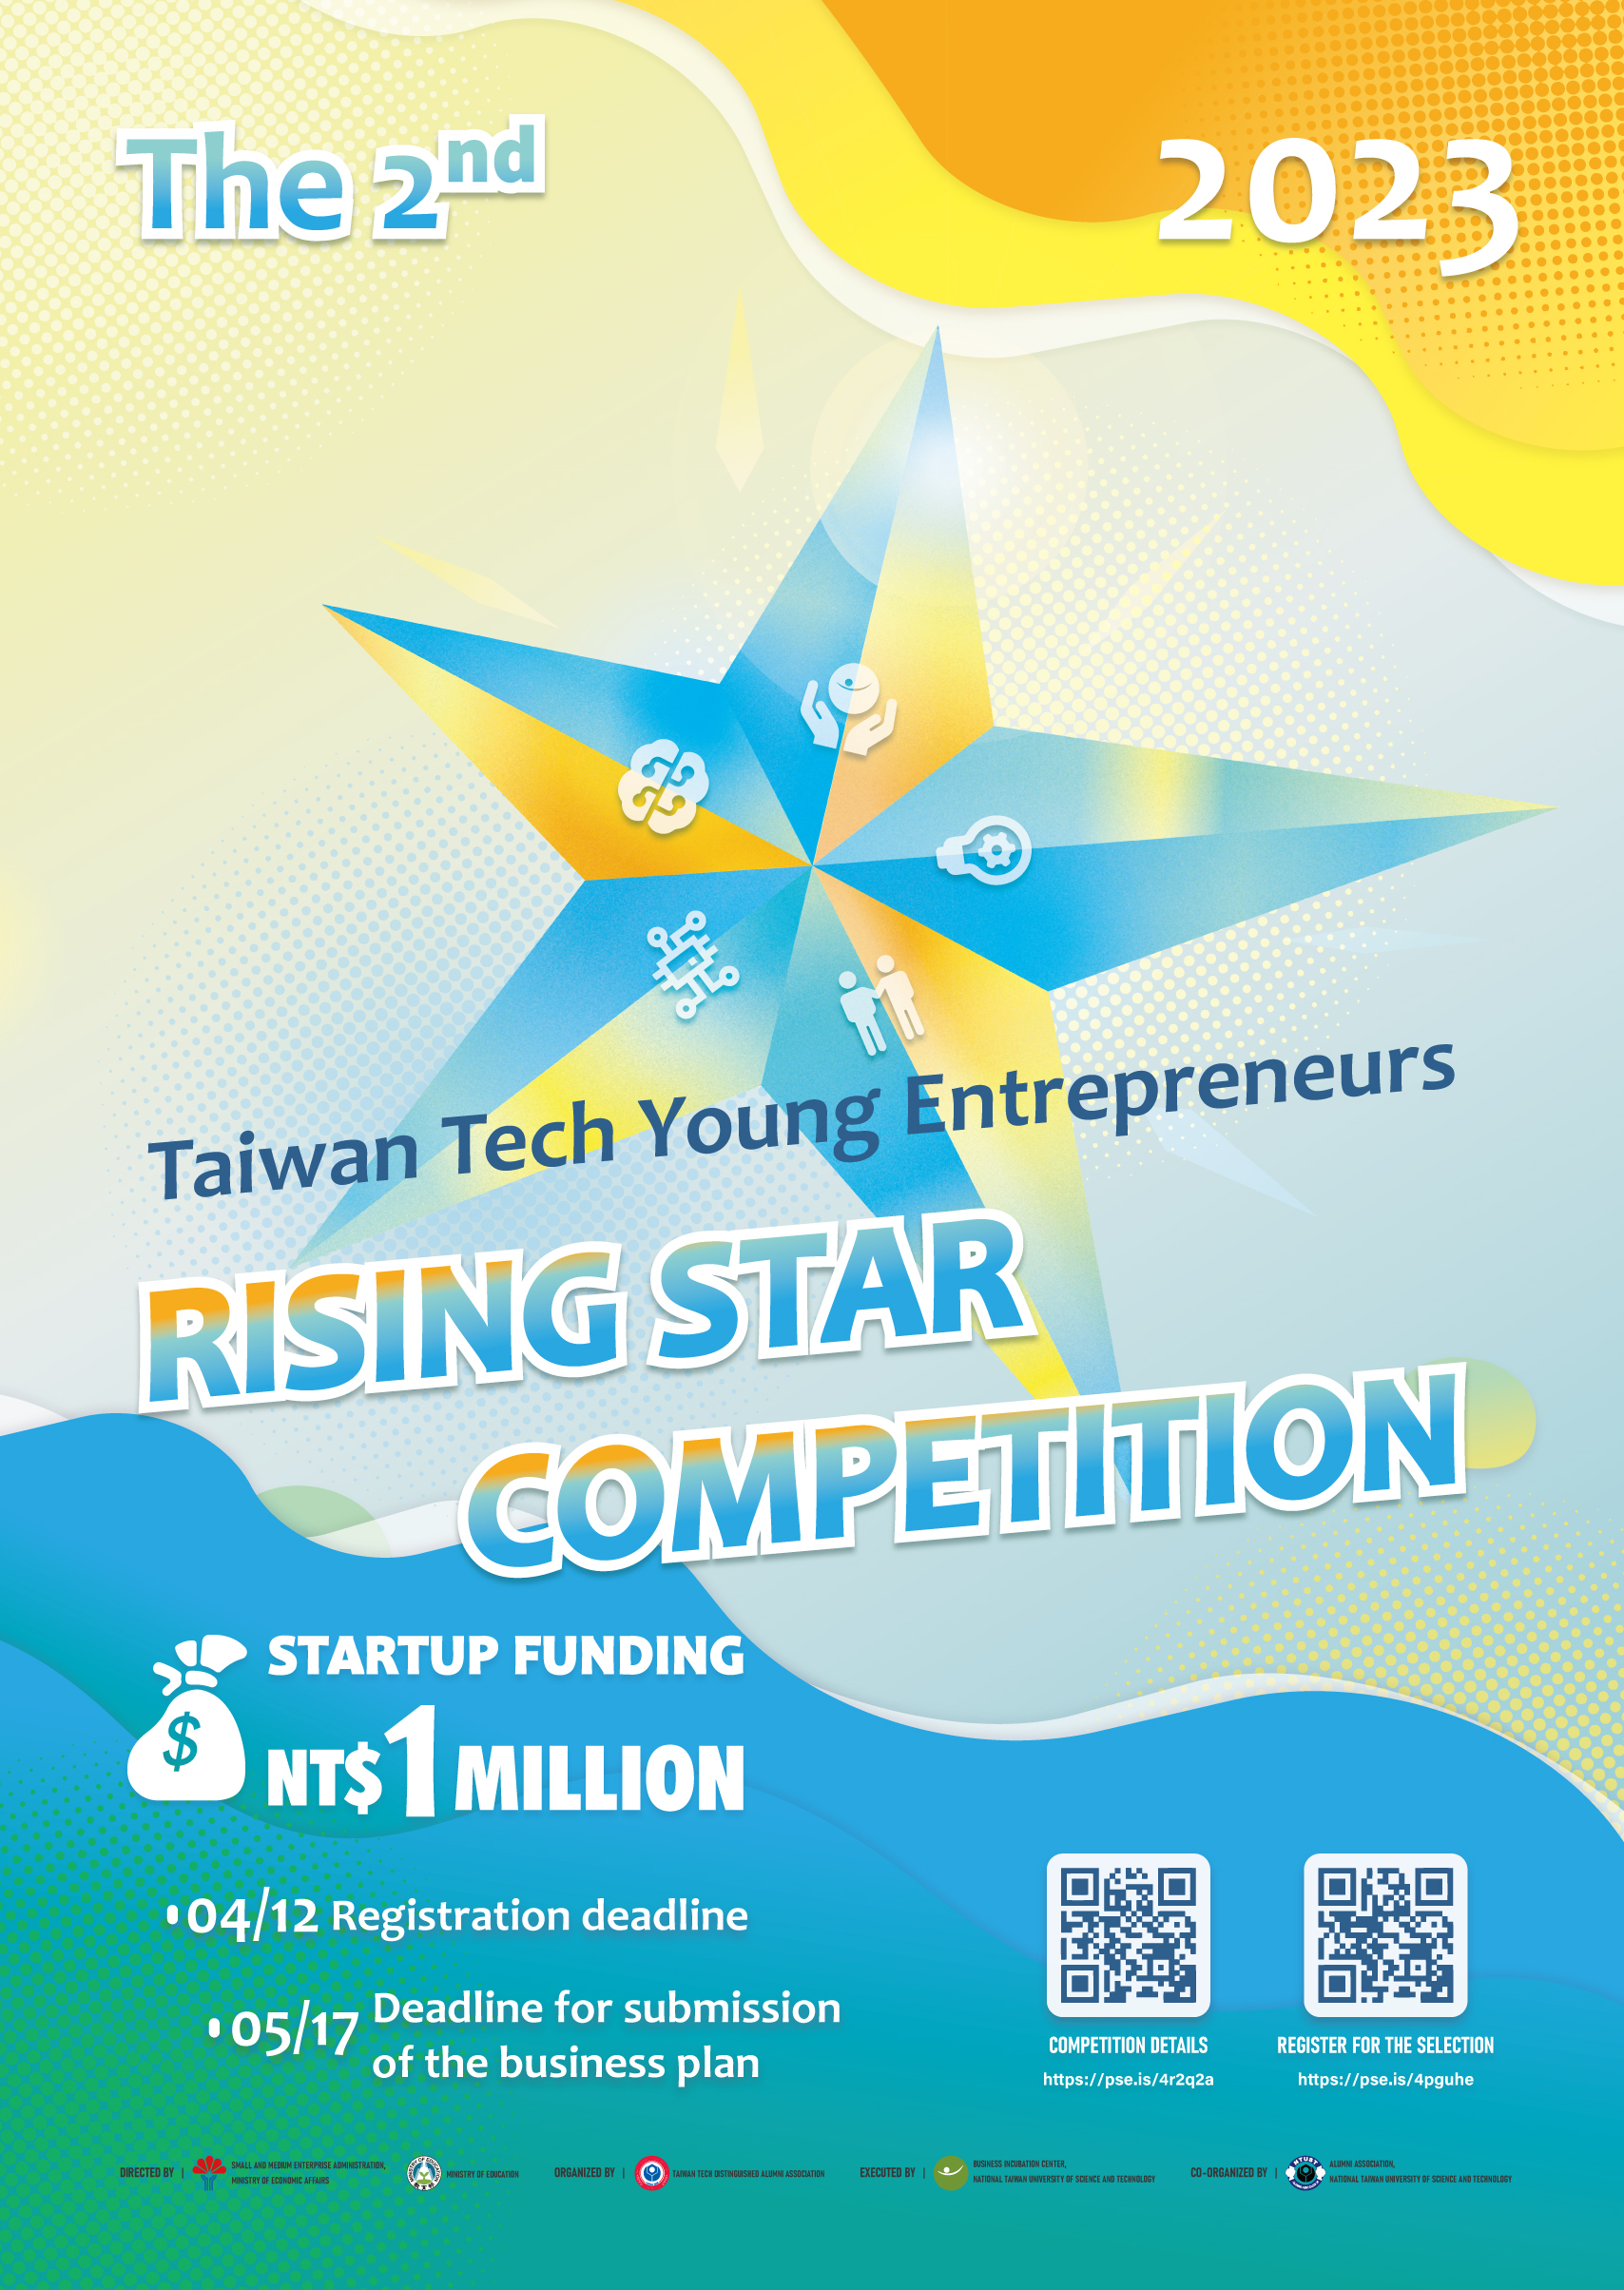 The 2nd Taiwan Tech Young Entrepreneurs' Rising Star Competition 2023